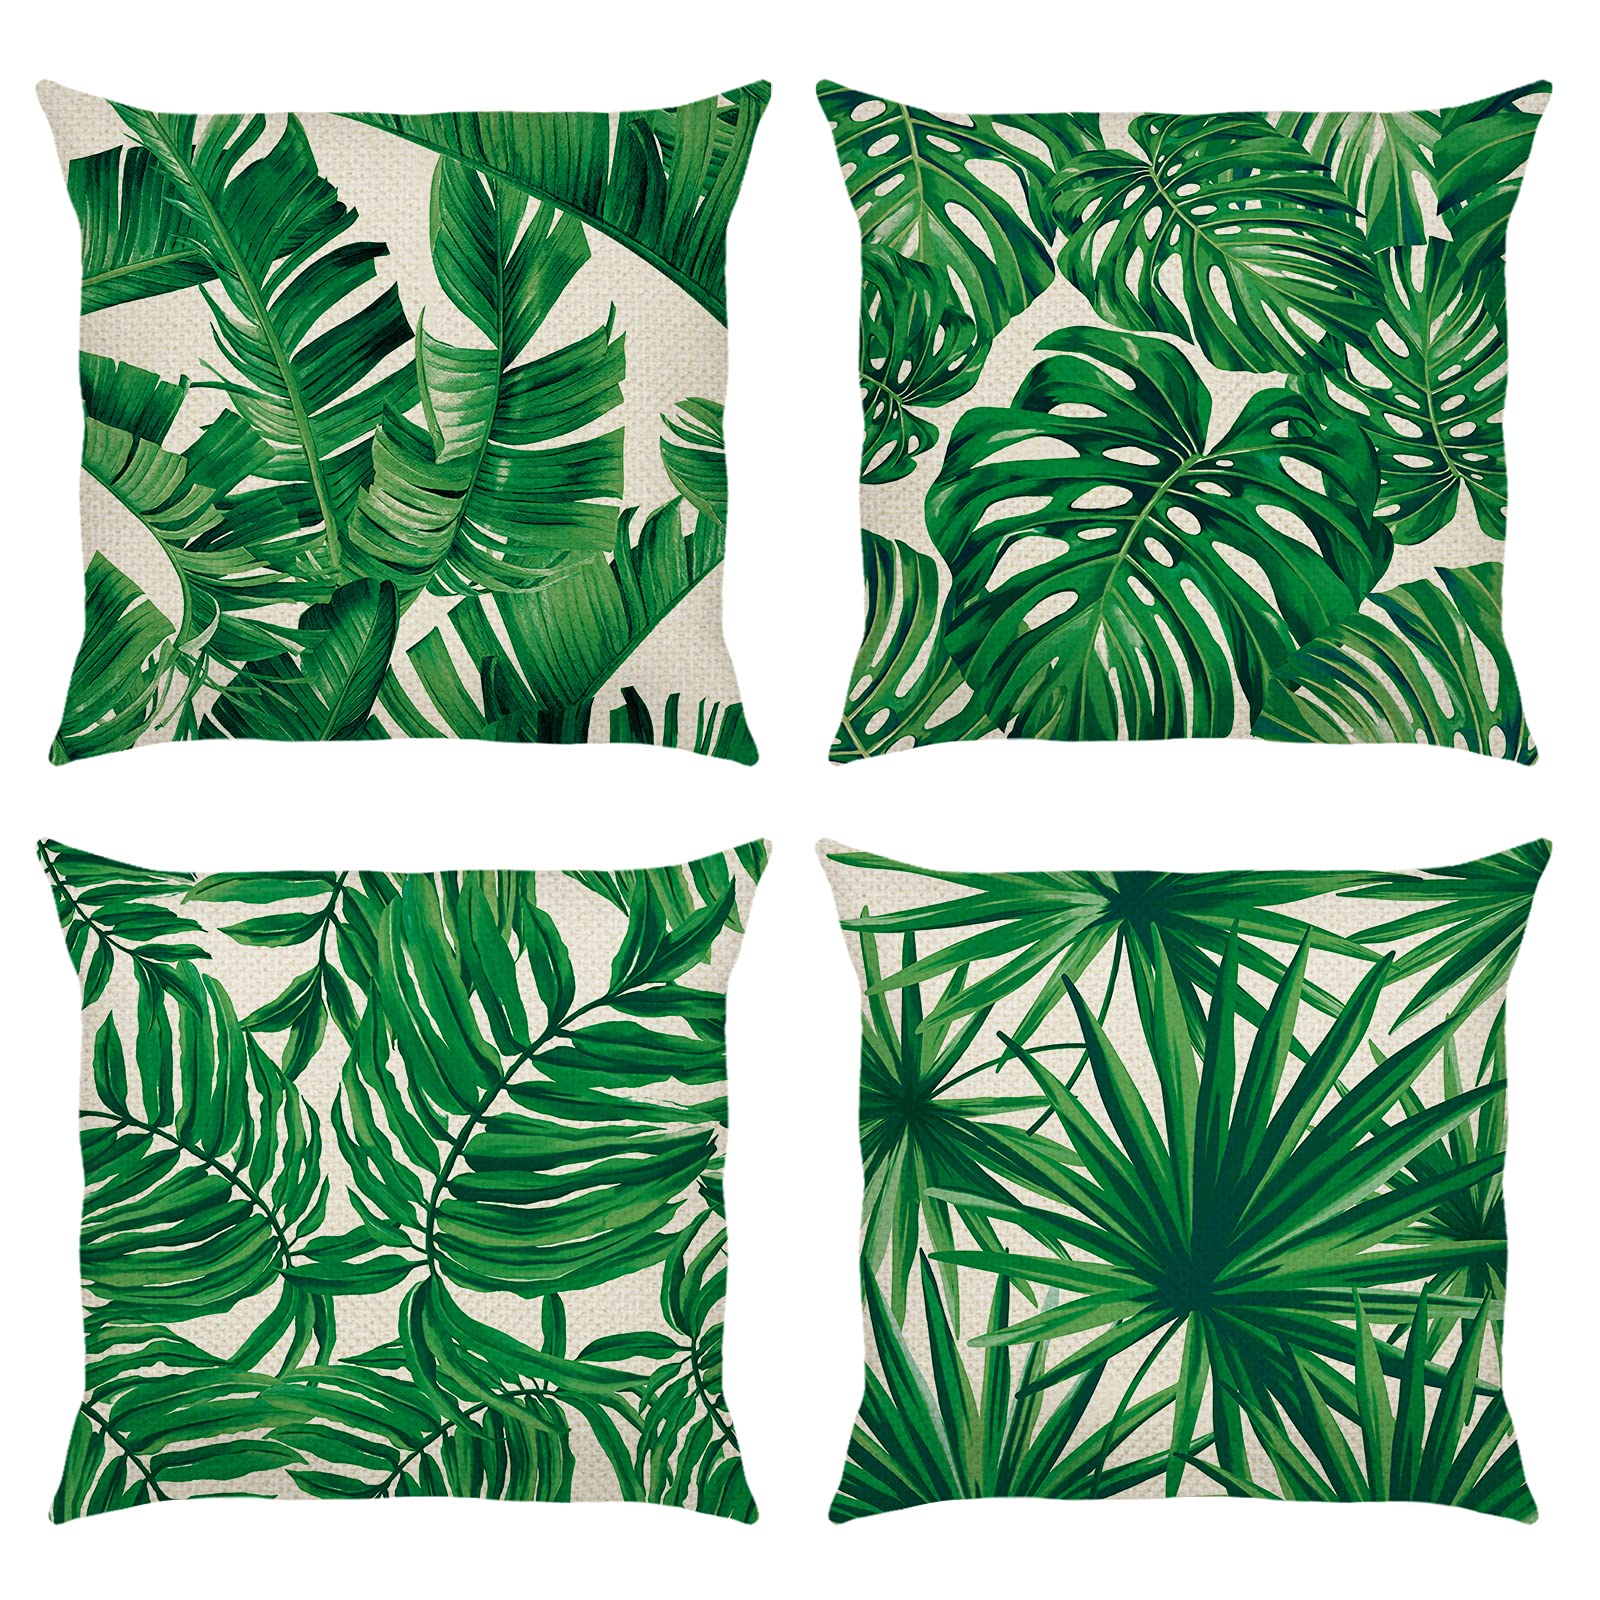 Bonhause Tropical Leaves Cushion Covers 18 x 18 Inch Set of 4 Green Leaf Decorative Throw Pillow Covers Polyester Linen Pillowcases for Sofa Couch Bed Garden Outdoor Home Decor, 45 x 45 cm